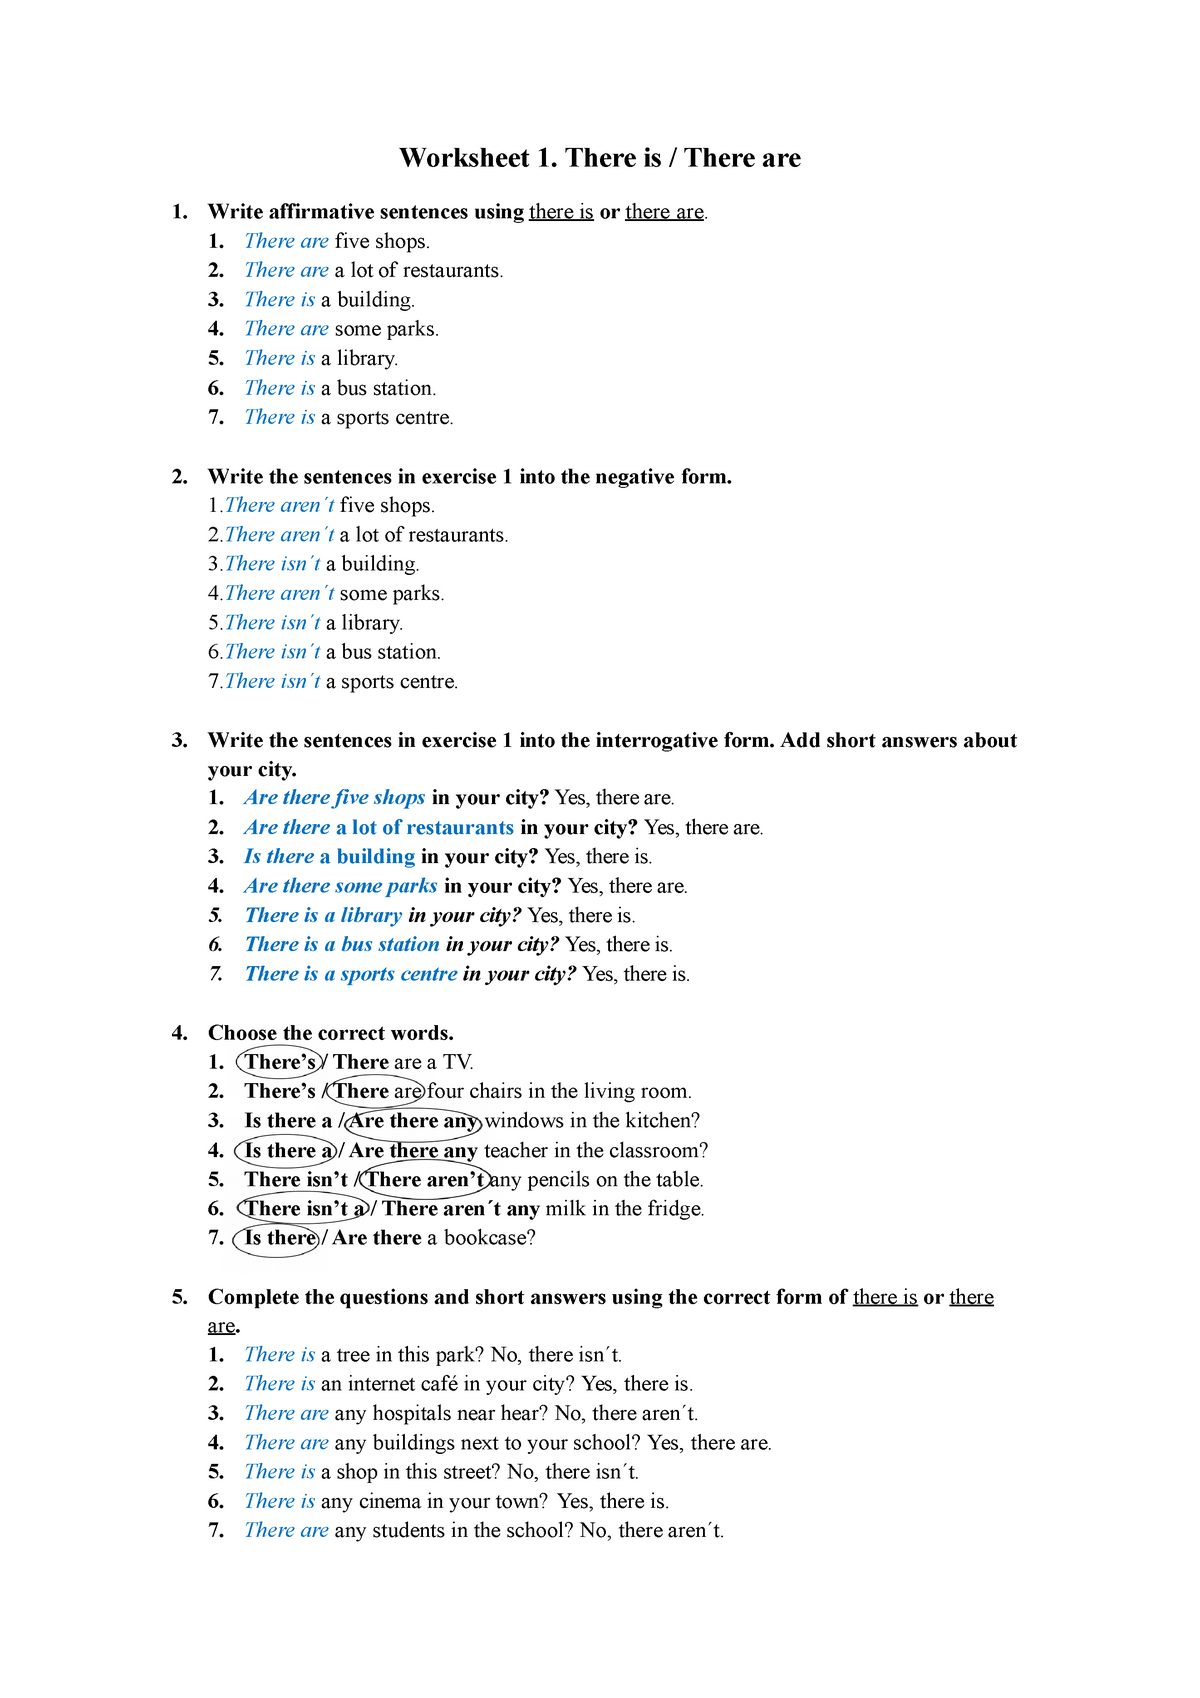 tarea-3-worksheet-1-there-is-there-are-1-write-affirmative